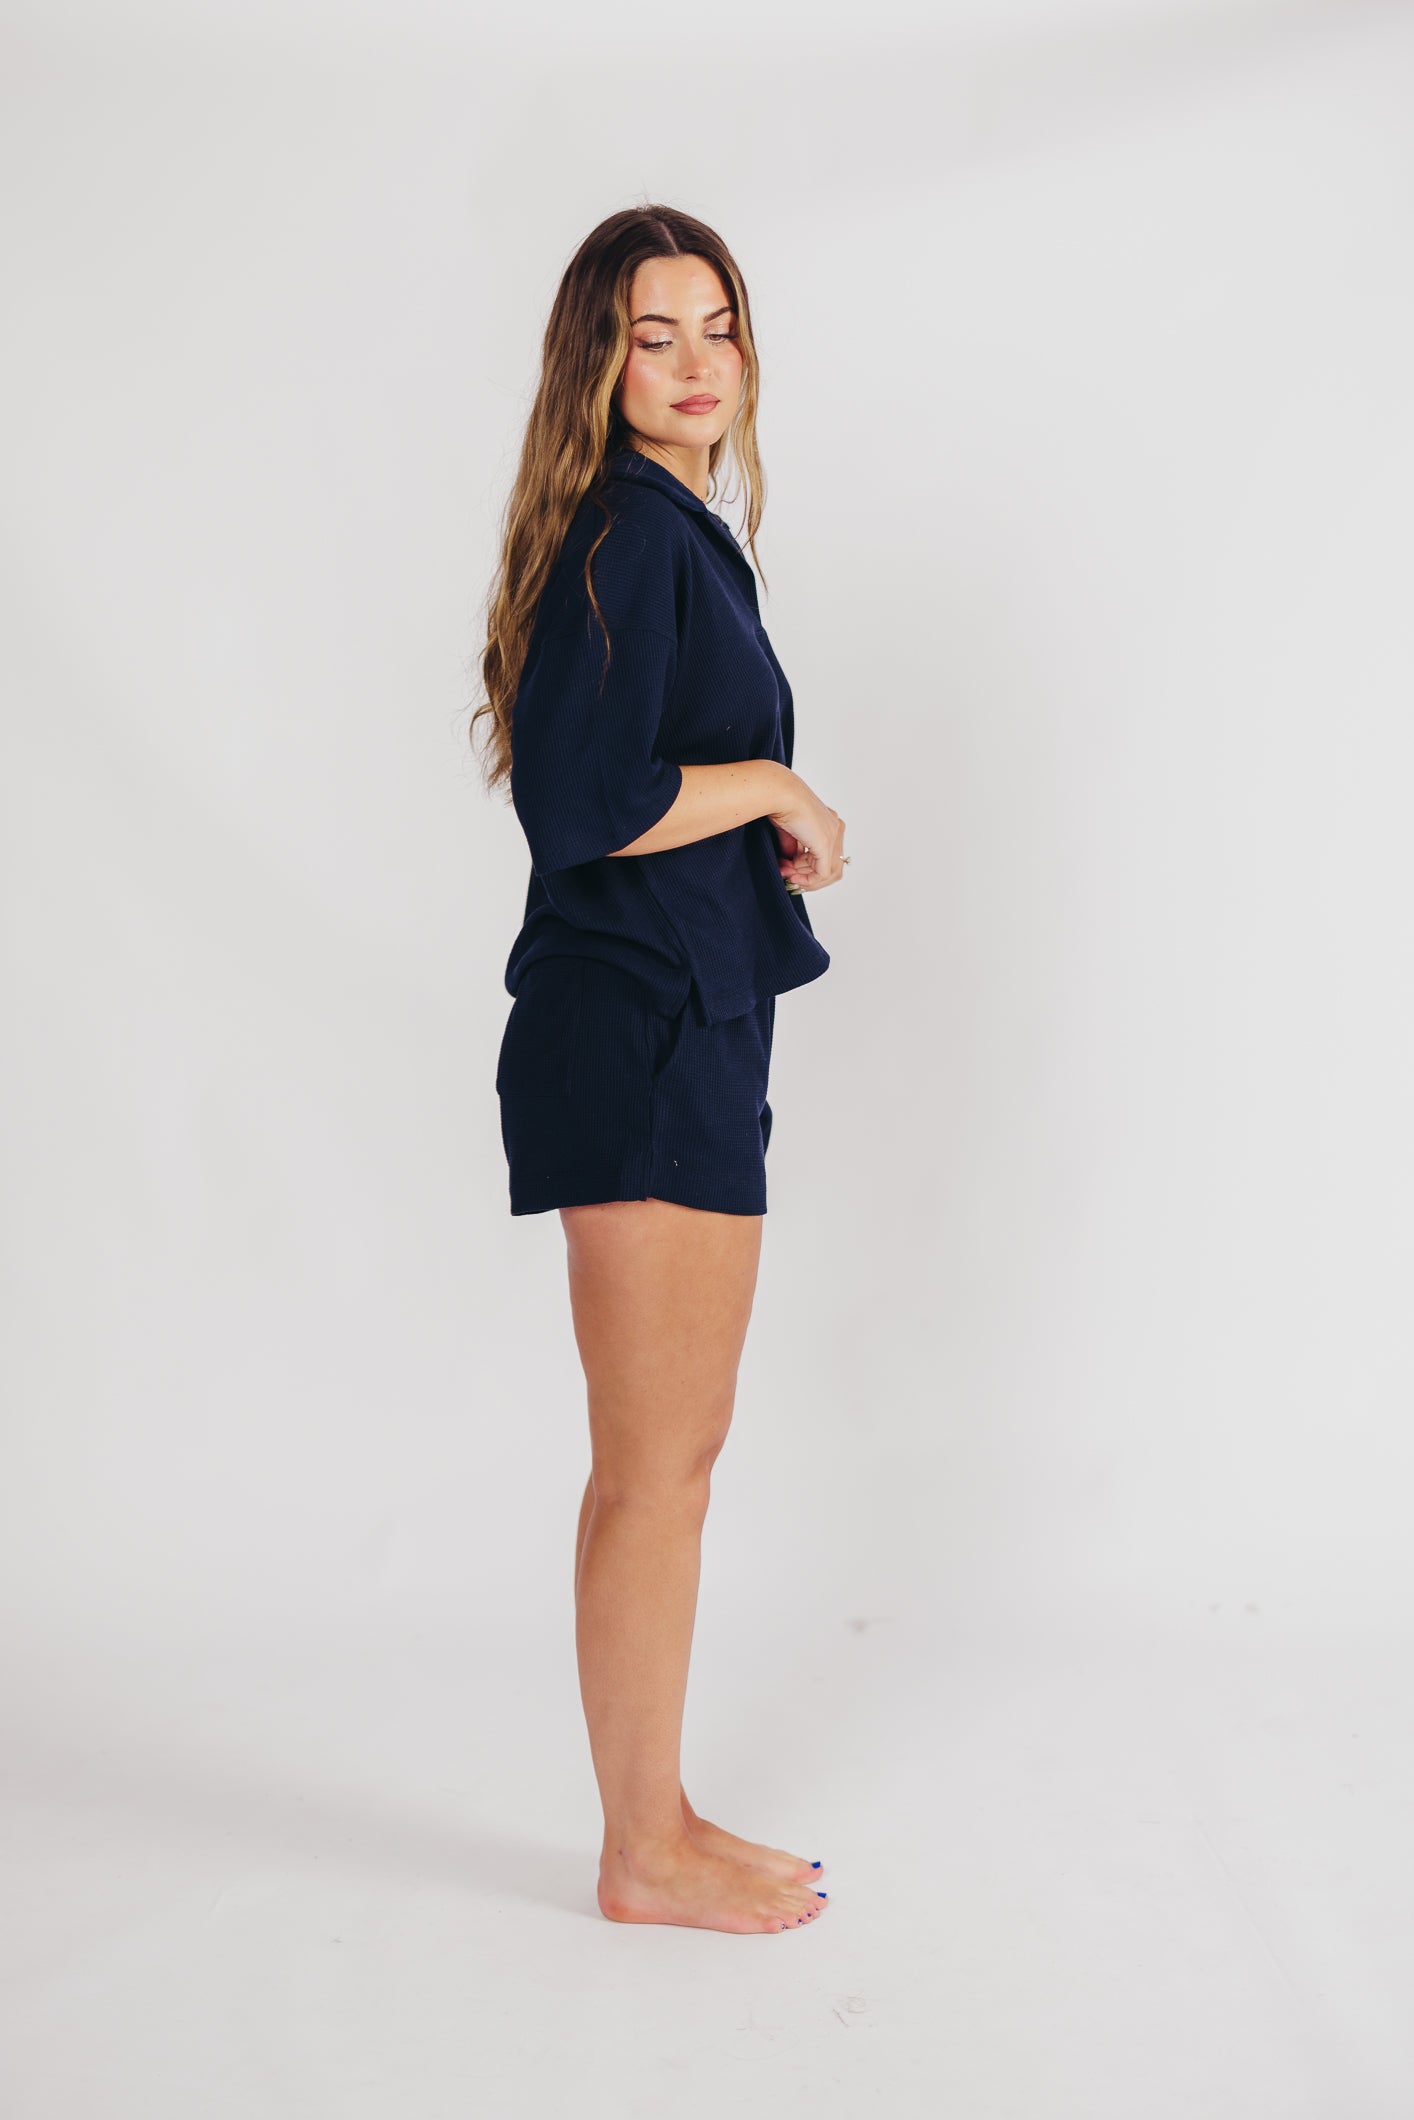 Leanna Knit Shorts in Navy (top sold separately)